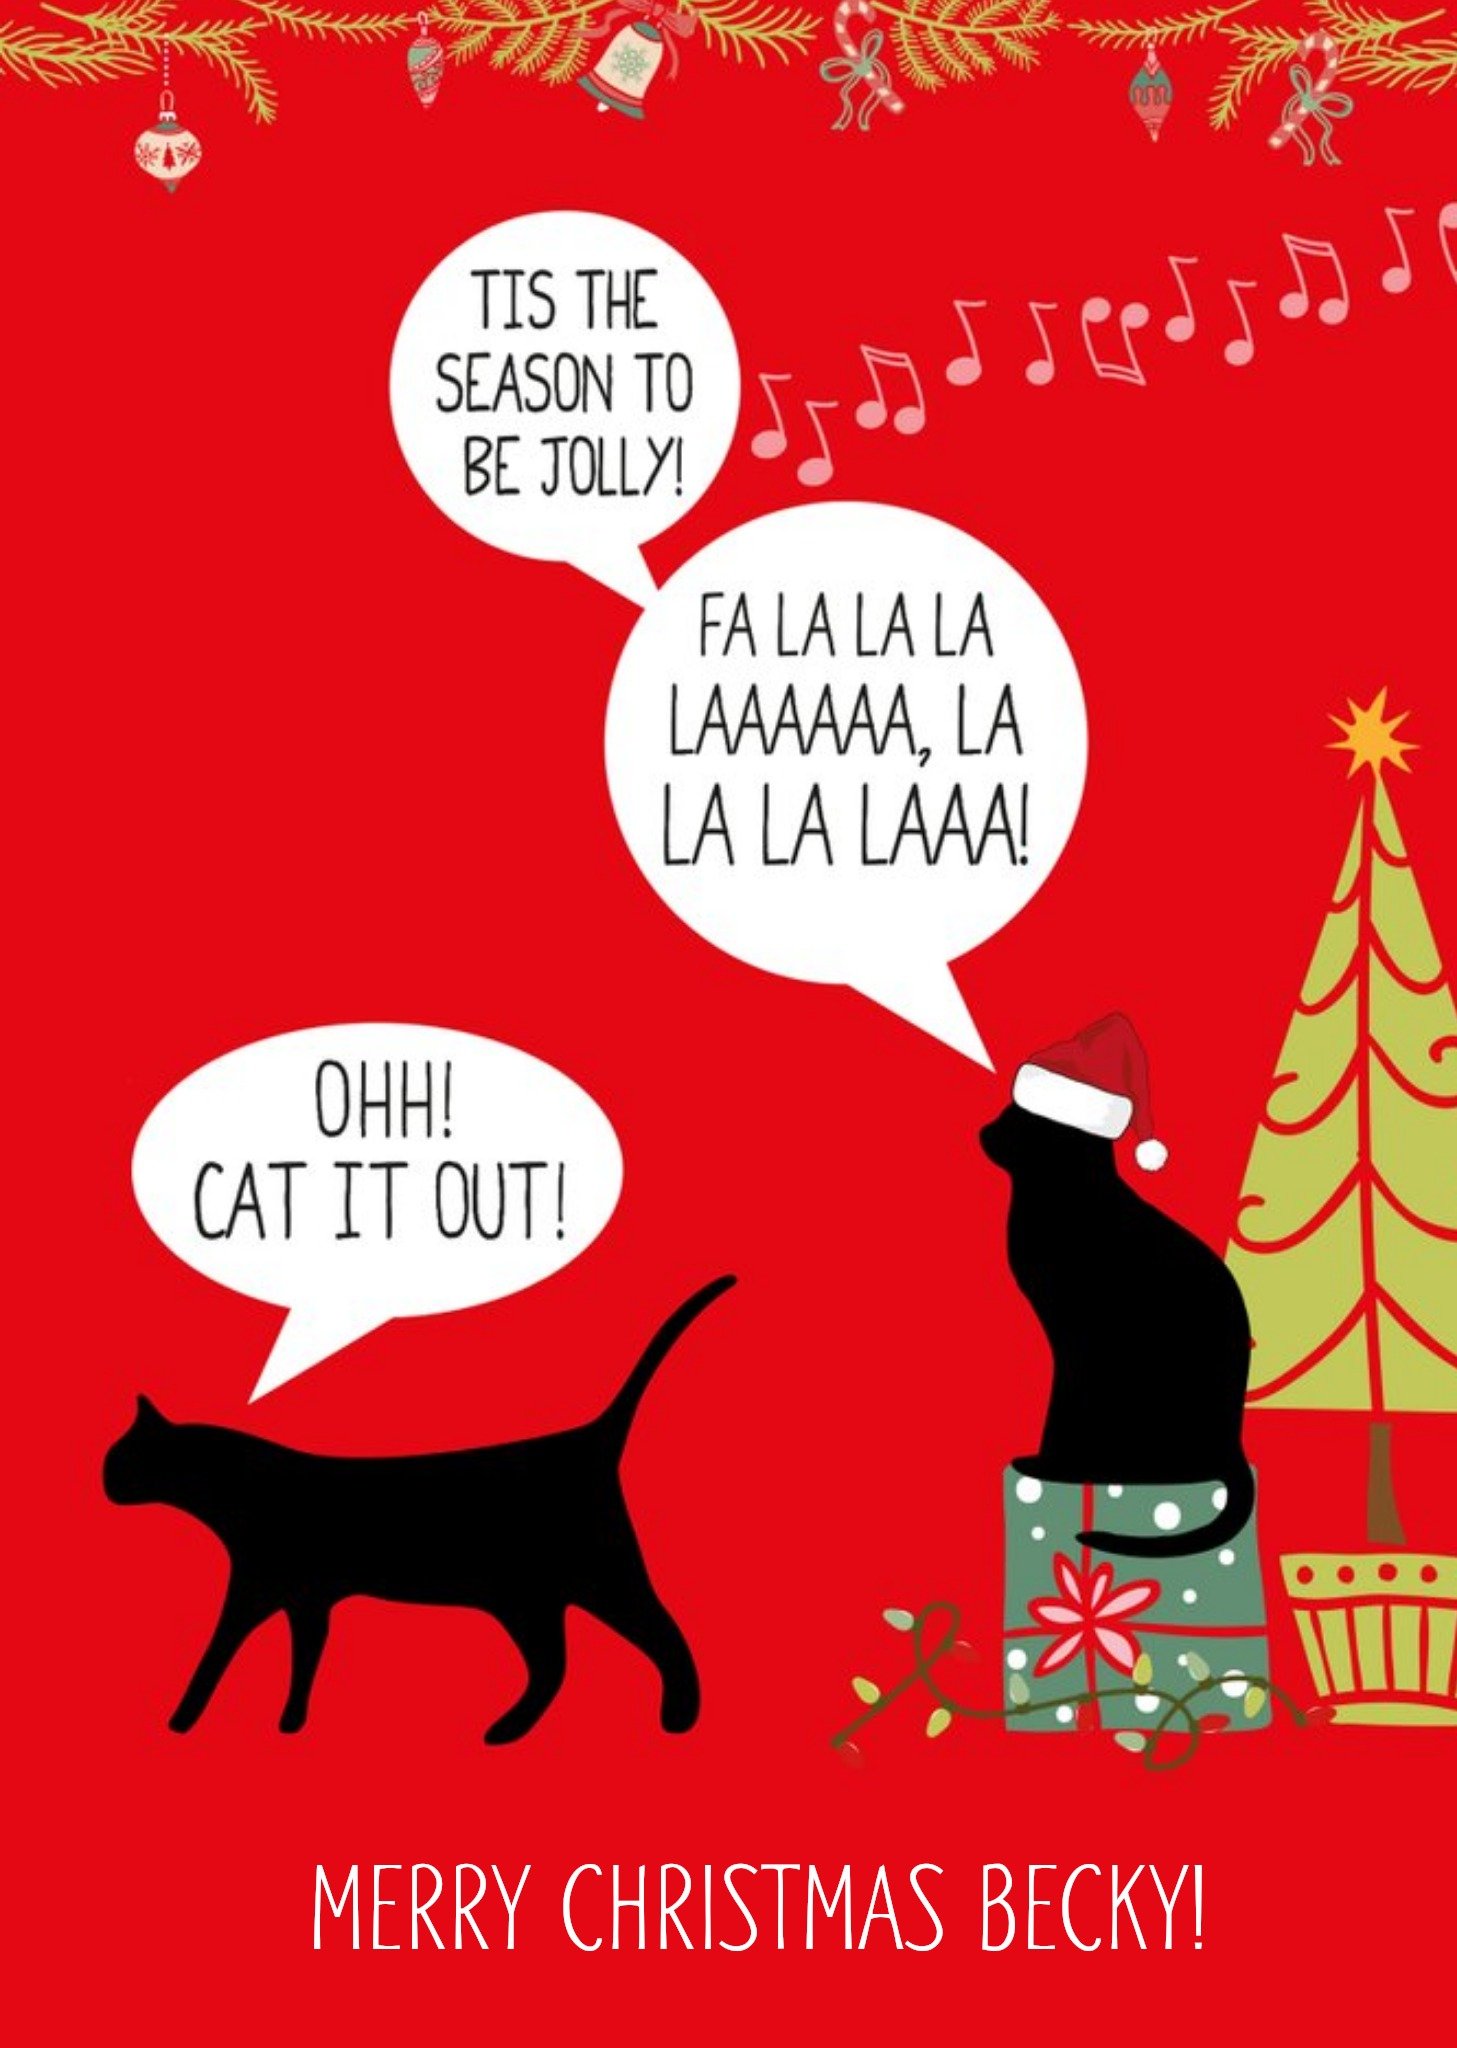 Moonpig Animal Crackers Cats Singing Tis The Season To Be Jolly Funny Christmas Card, Large